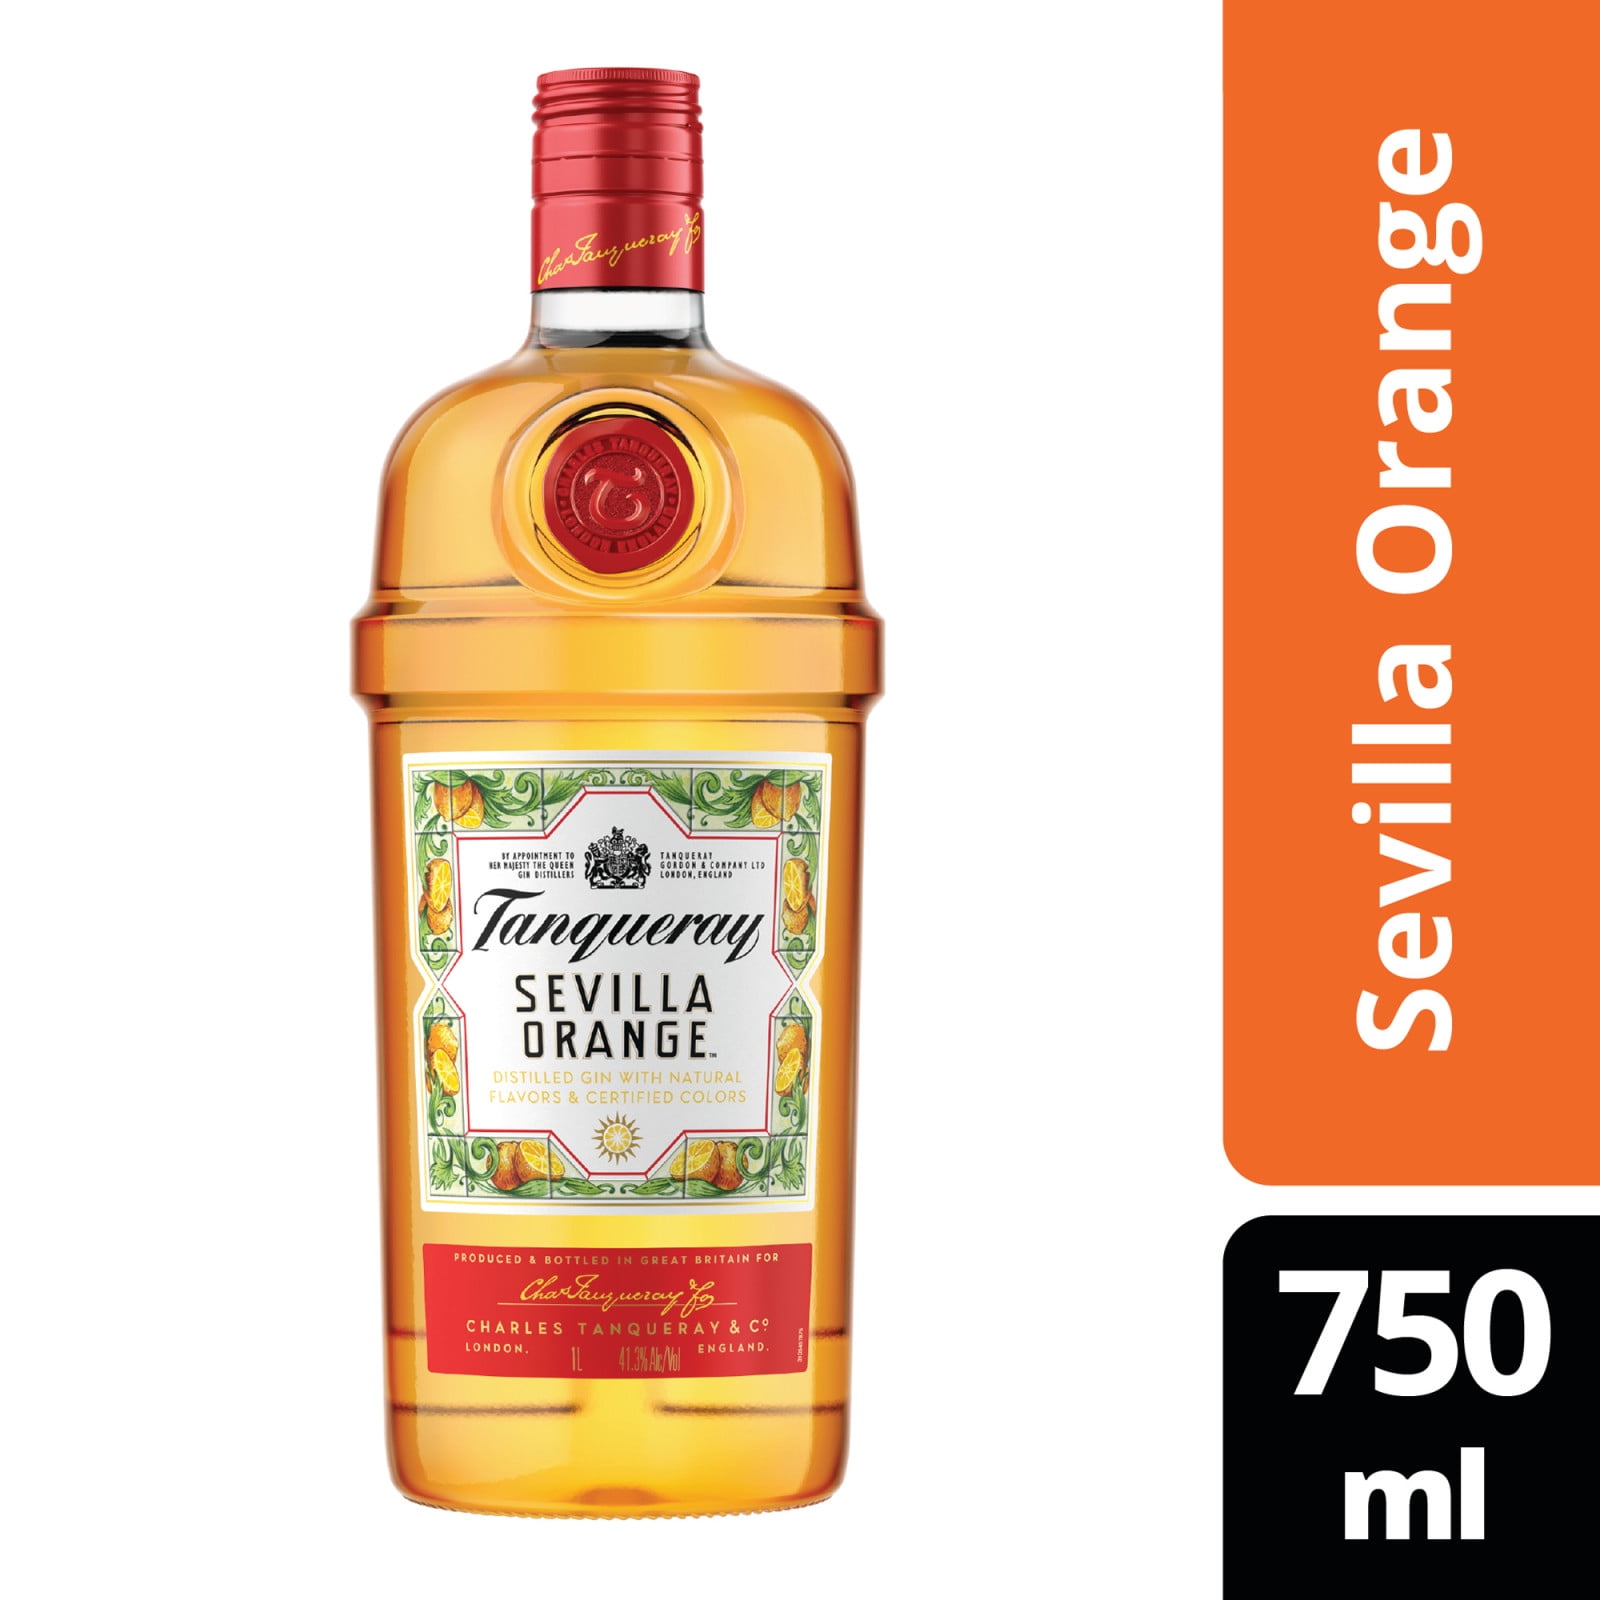 41% (Distilled and Orange Tanqueray ml, ABV Flavors with Certified Sevilla Colors) Natural Gin 750